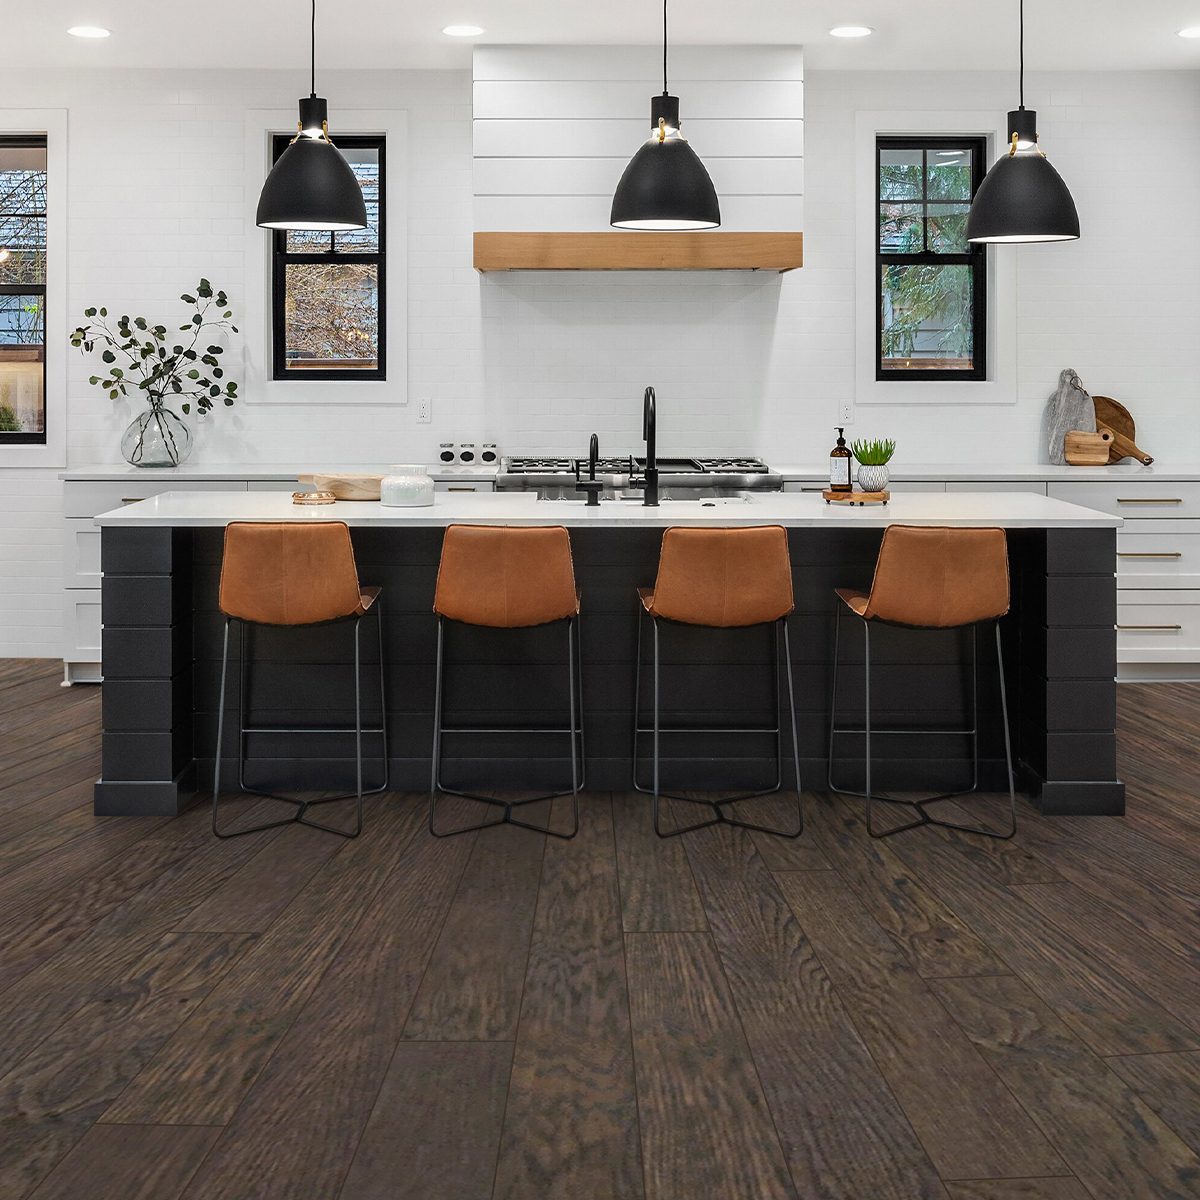 The 10 Best Engineered Wood Flooring Options According To Reviews FT Via Amazon.com  ?resize=522%2C522